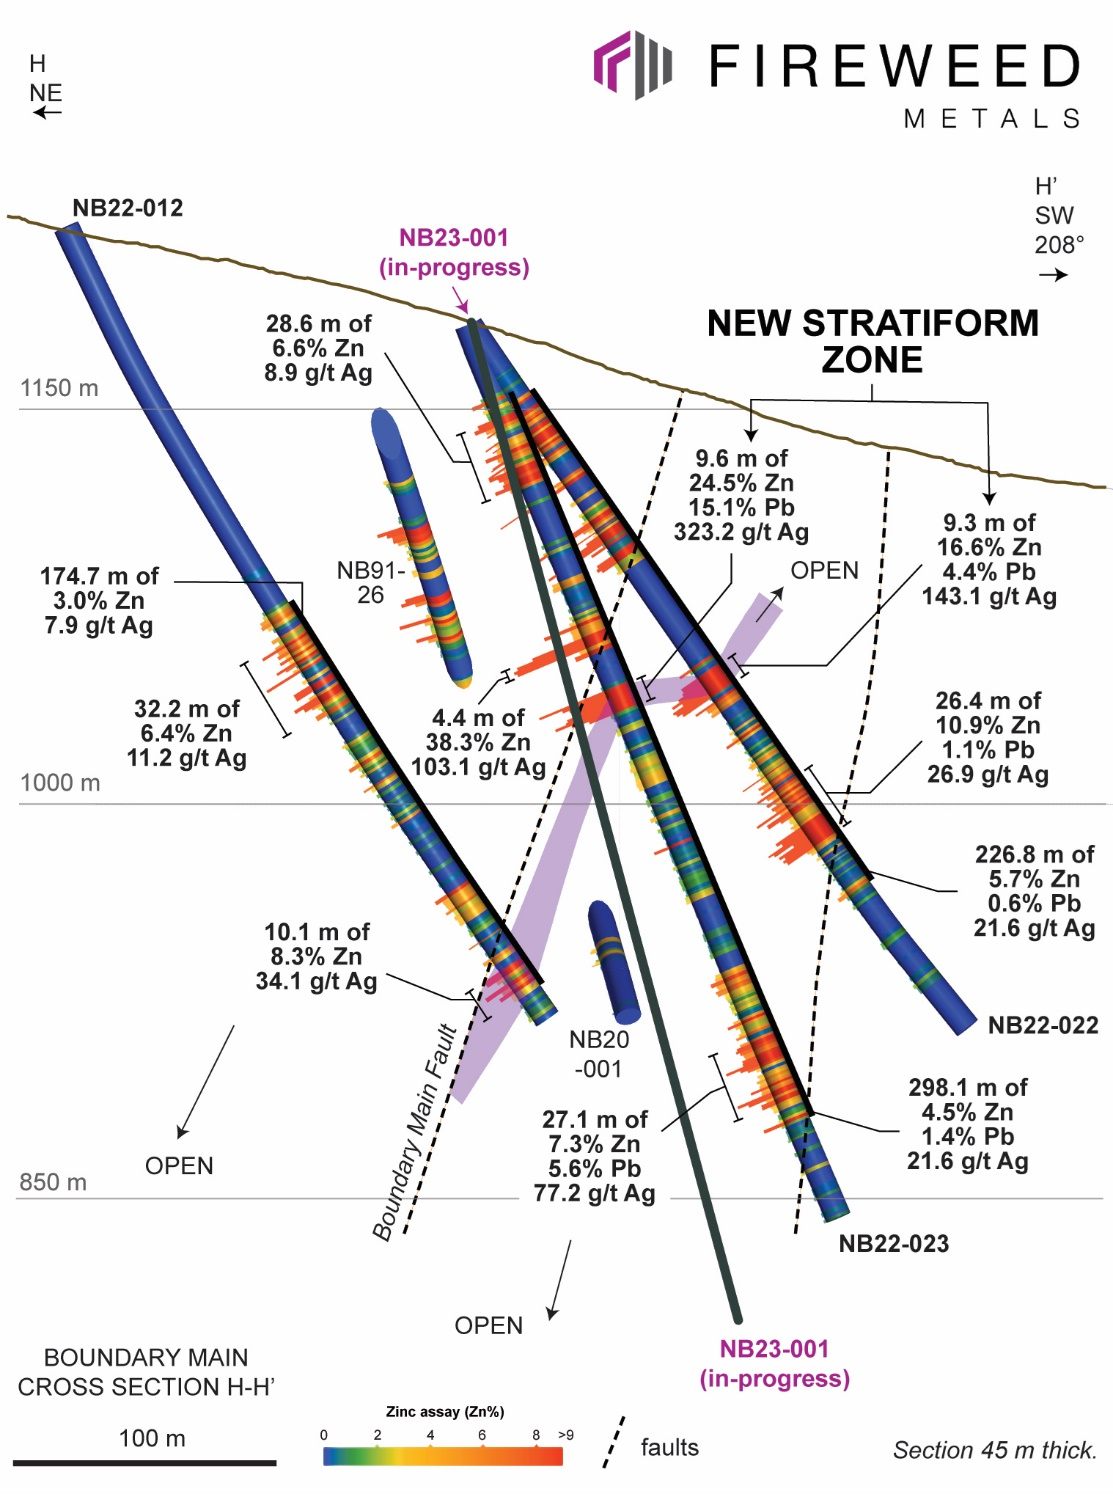 Location of the first hole of the season, NB23-001, stepping out from the high-grade new stratiform zone in the footwall of the Boundary Main Fault, high-grade vein and breccia mineralization above the Boundary Main Fault, and volcaniclastic-hosted mineralization at depth.